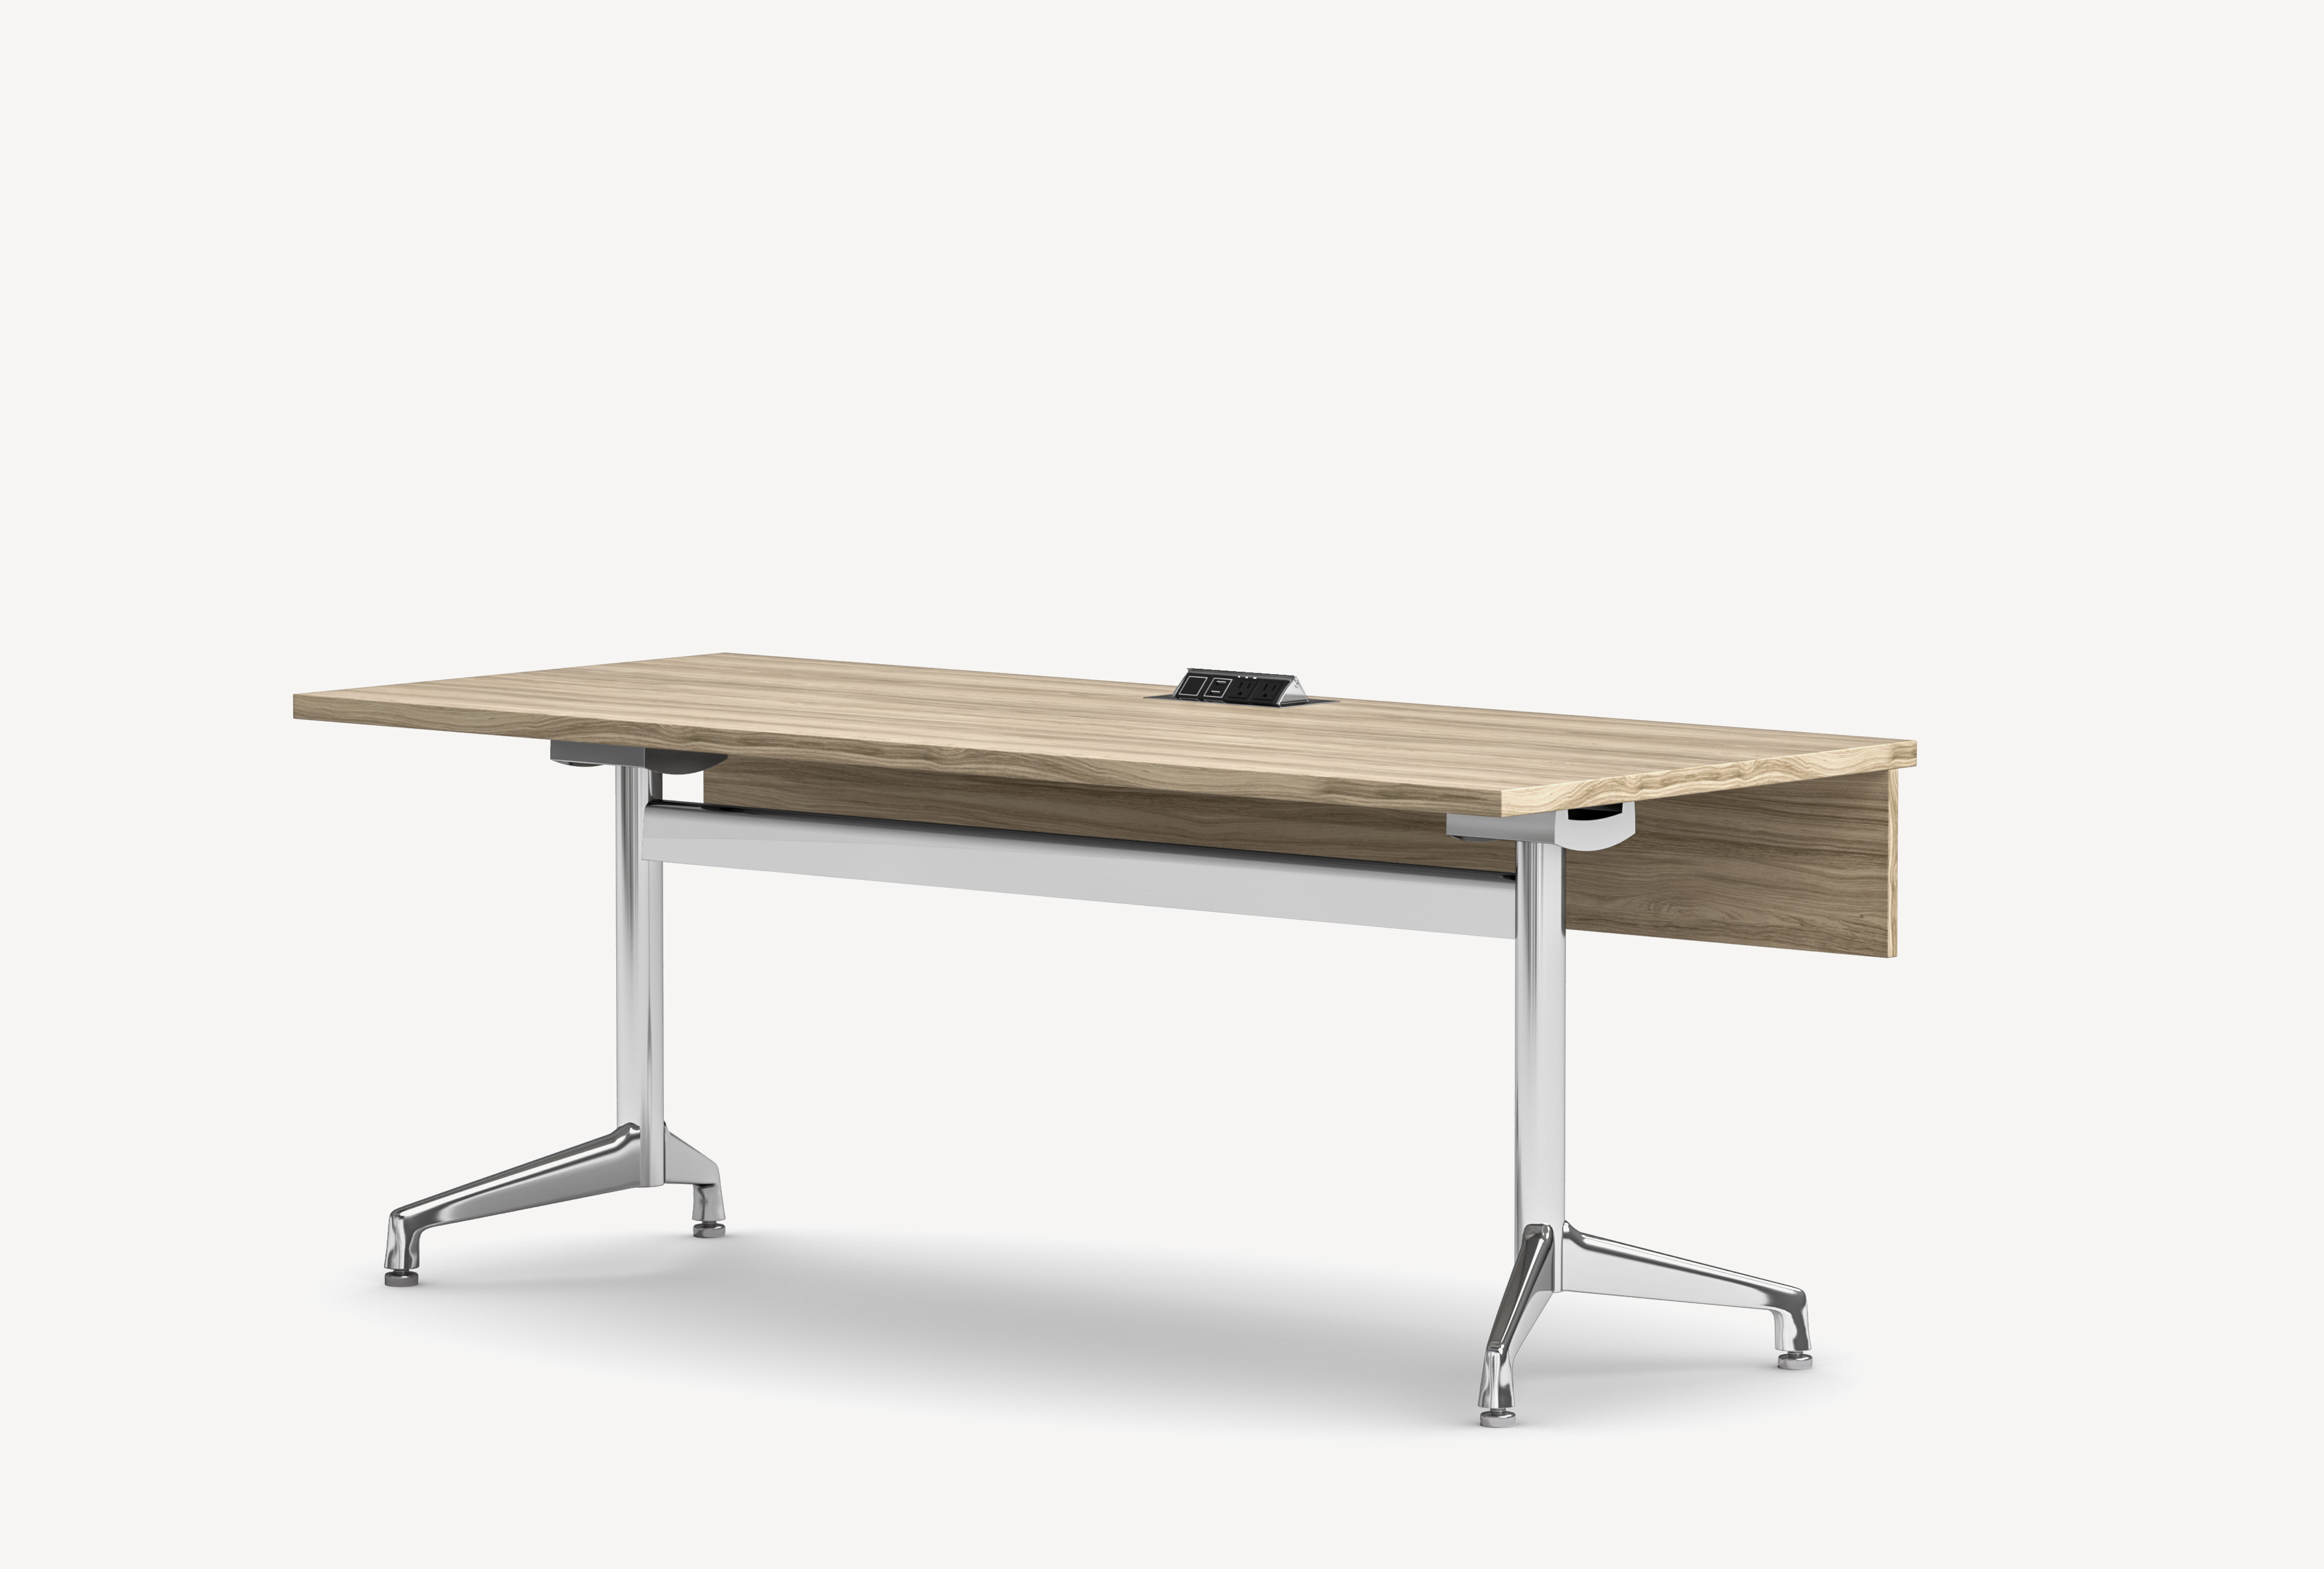 Three-quarter front view of the Gunlocke Briefing training table with light wood top, exposed power cutout, modesty panel, wire management and metal Y base.